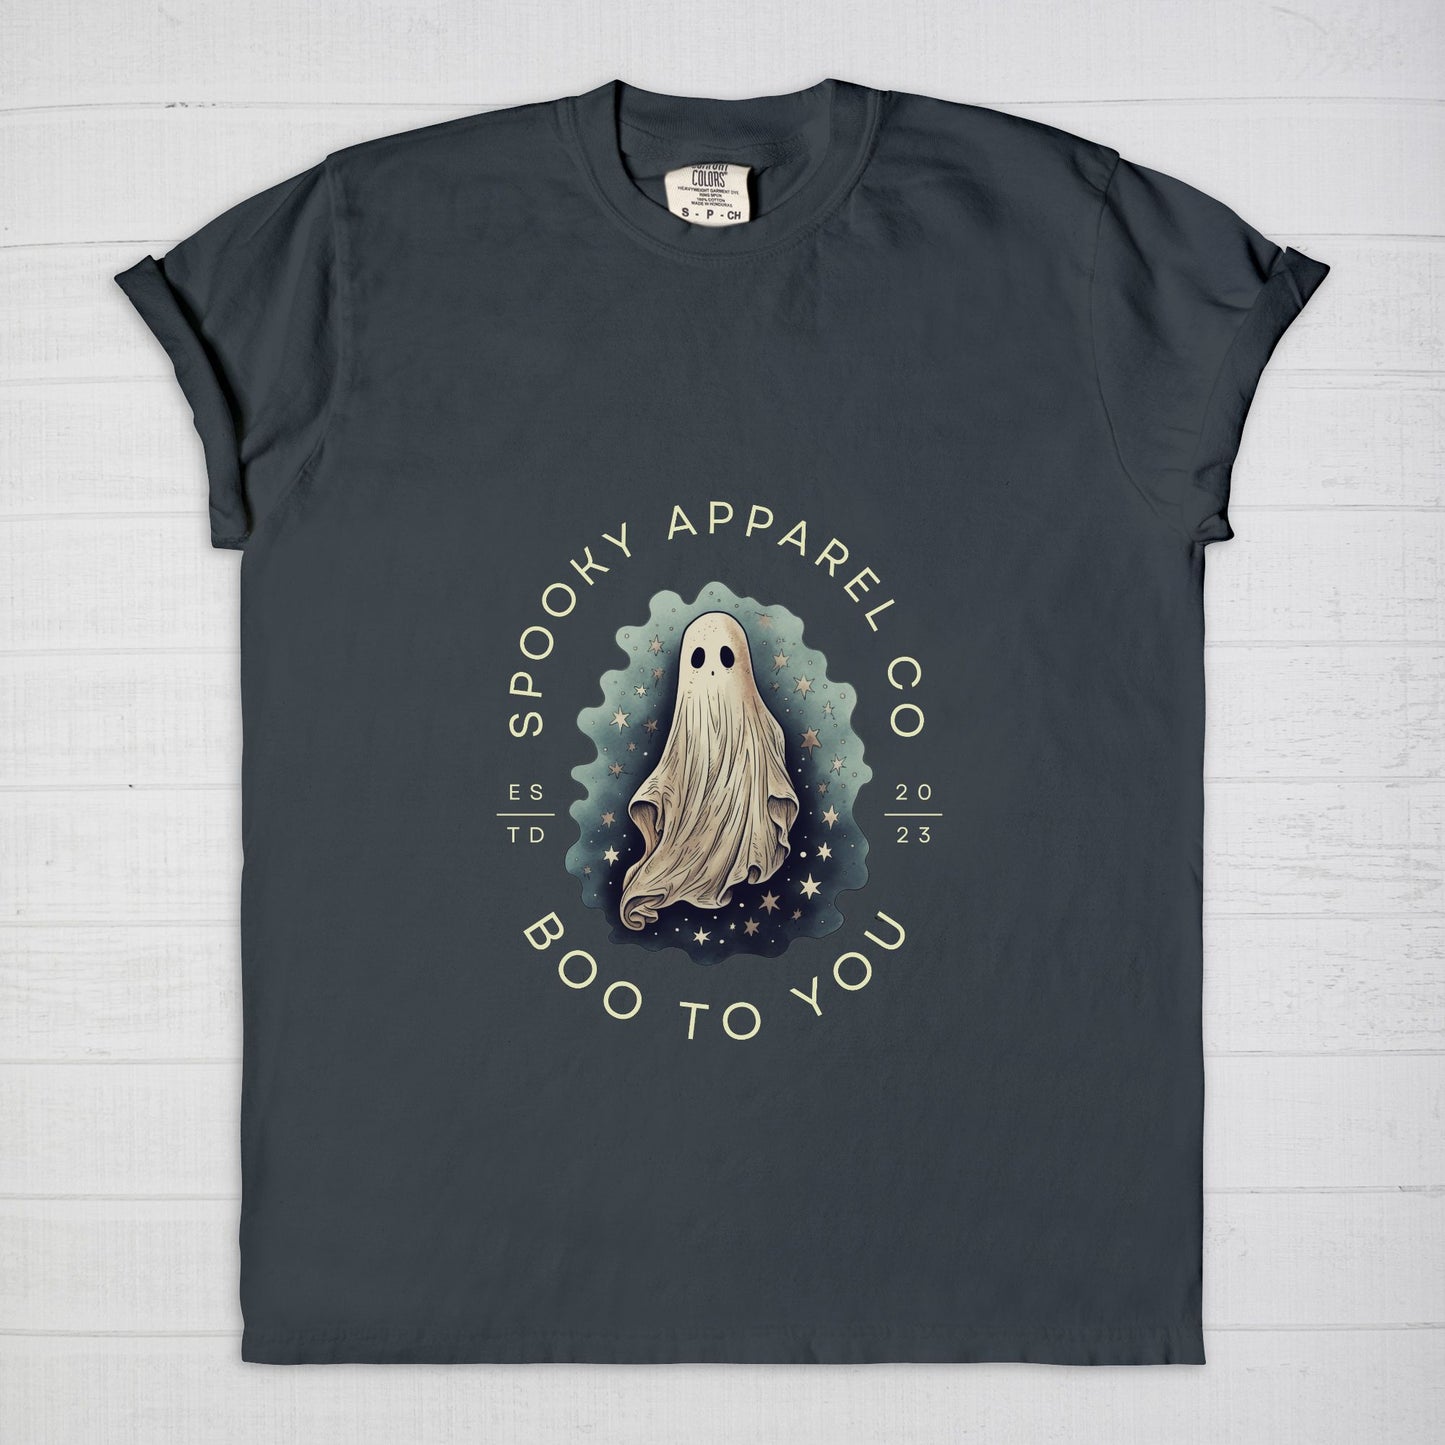 Spooky Apparel Co - Boo To You - Comfort Color Tee